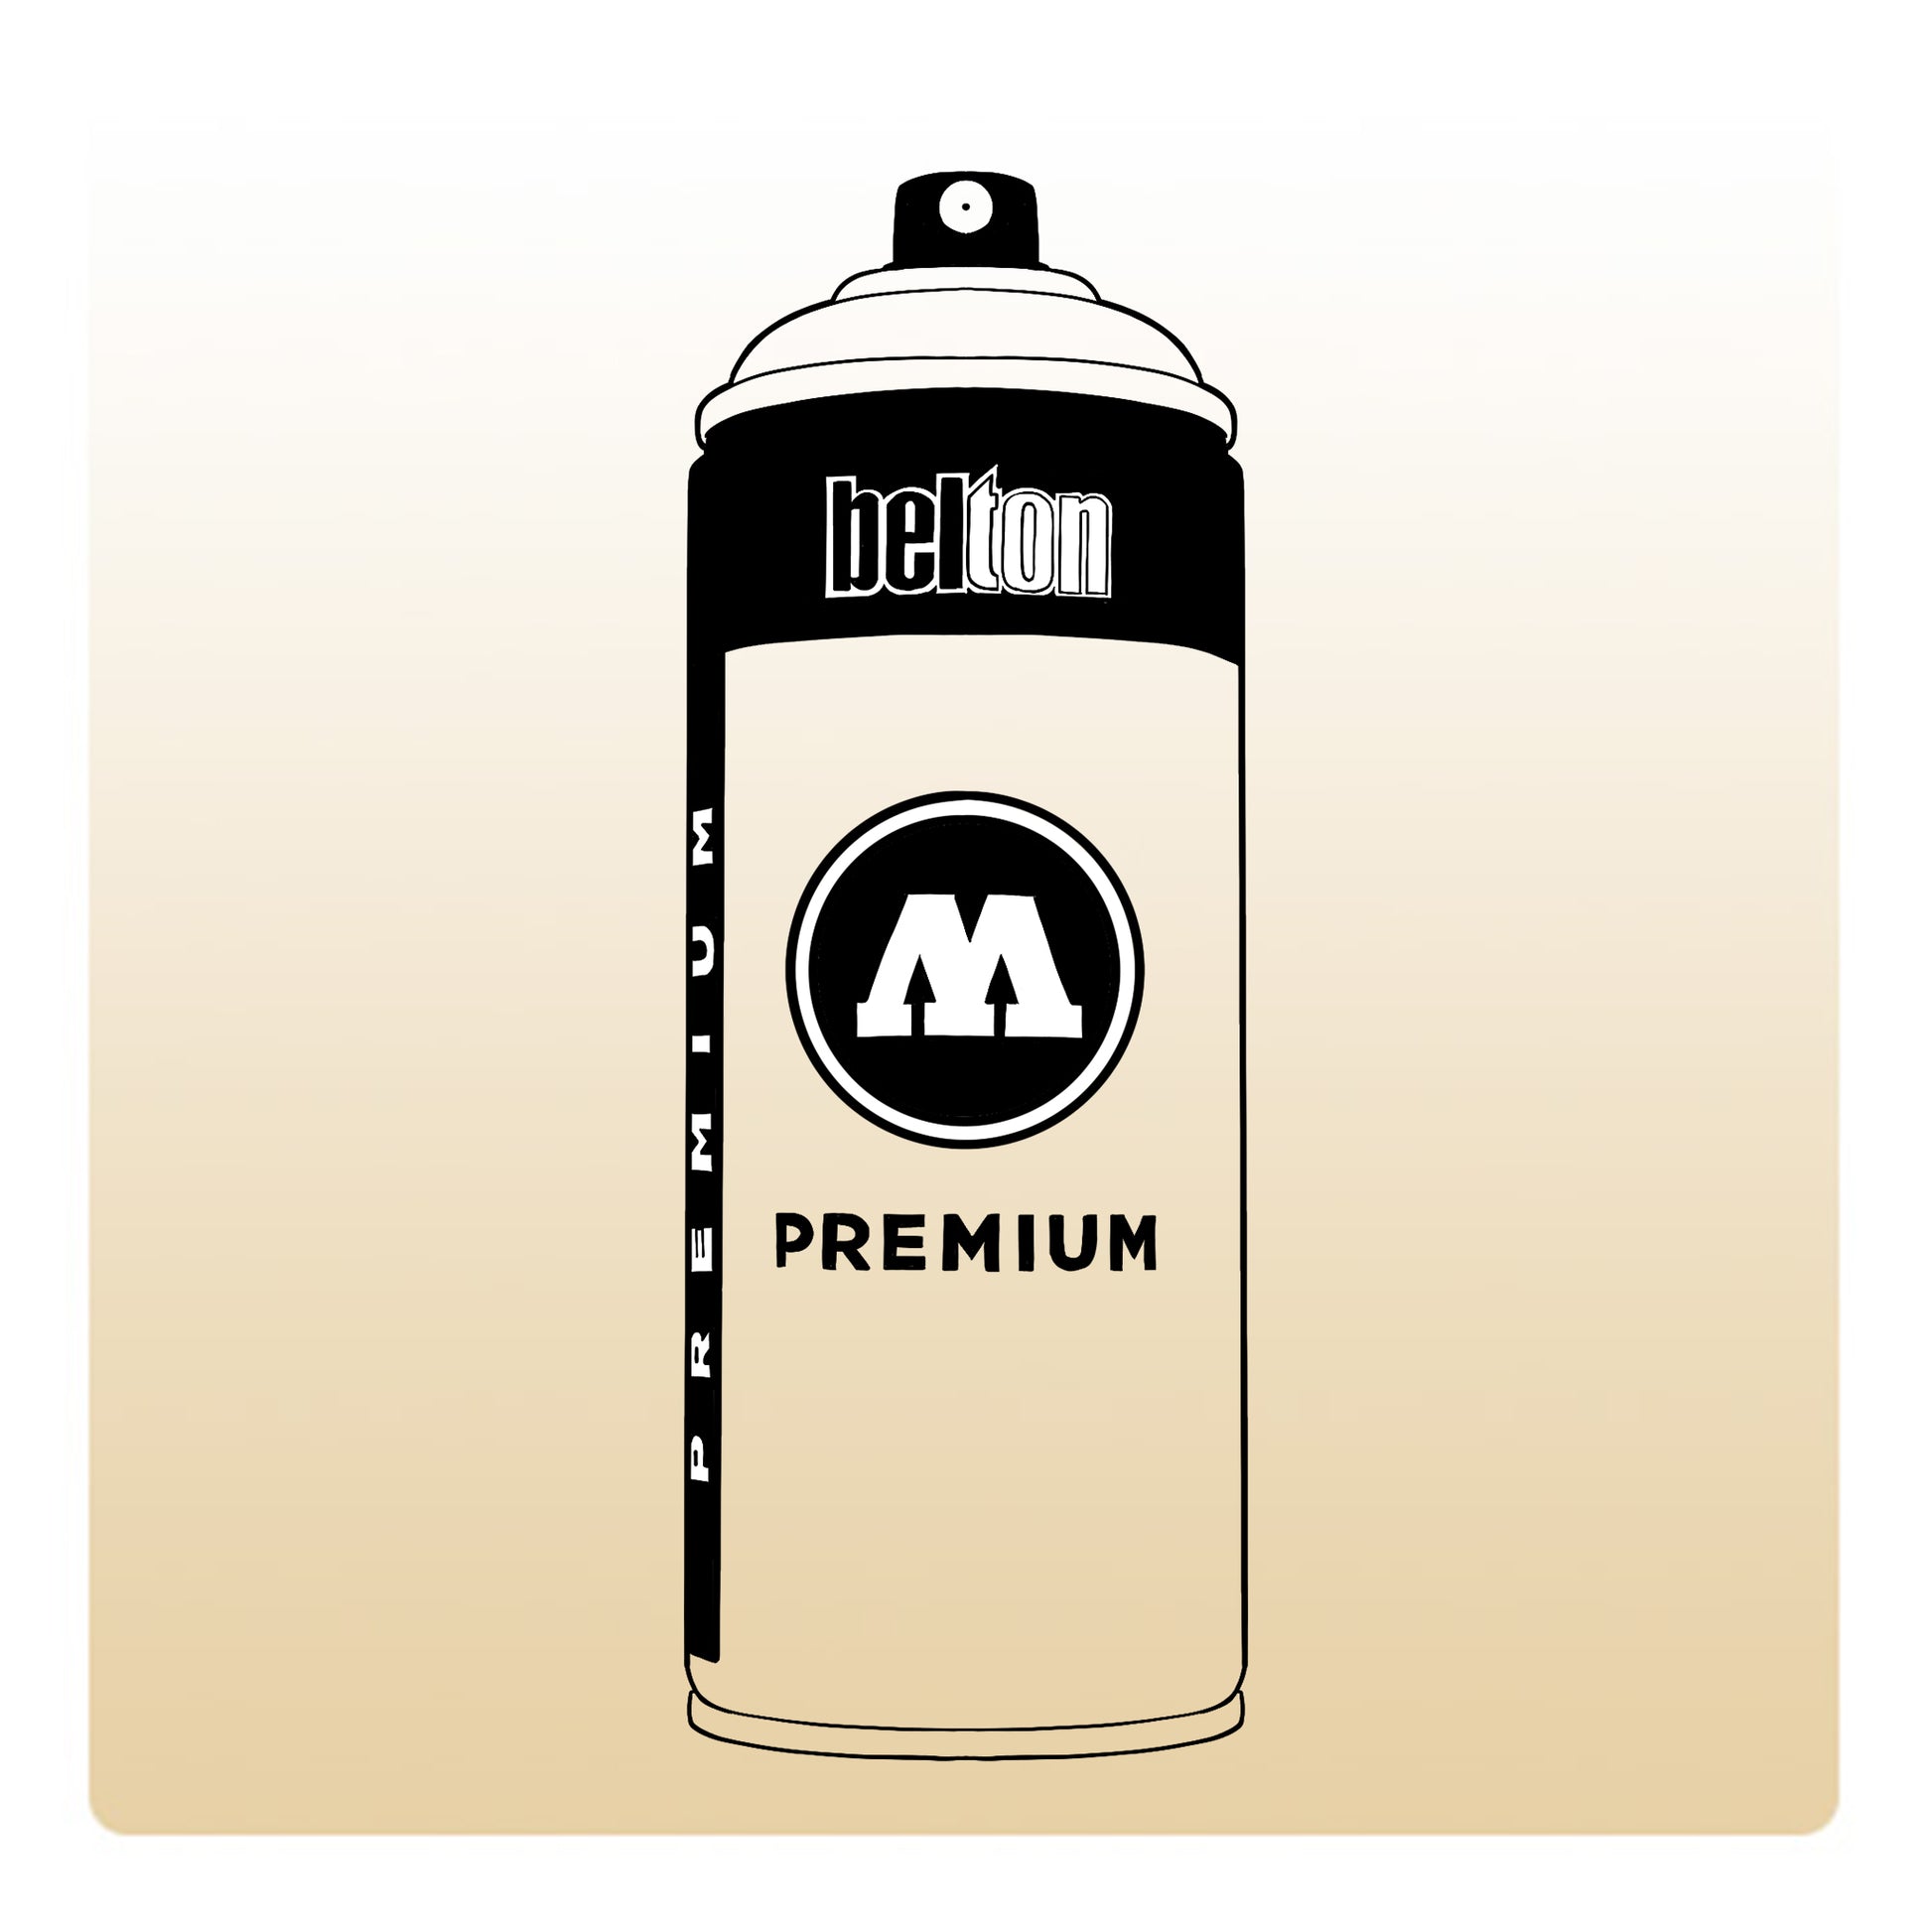 A line drawing of a spray paint can with a transparent, cream color swatch.